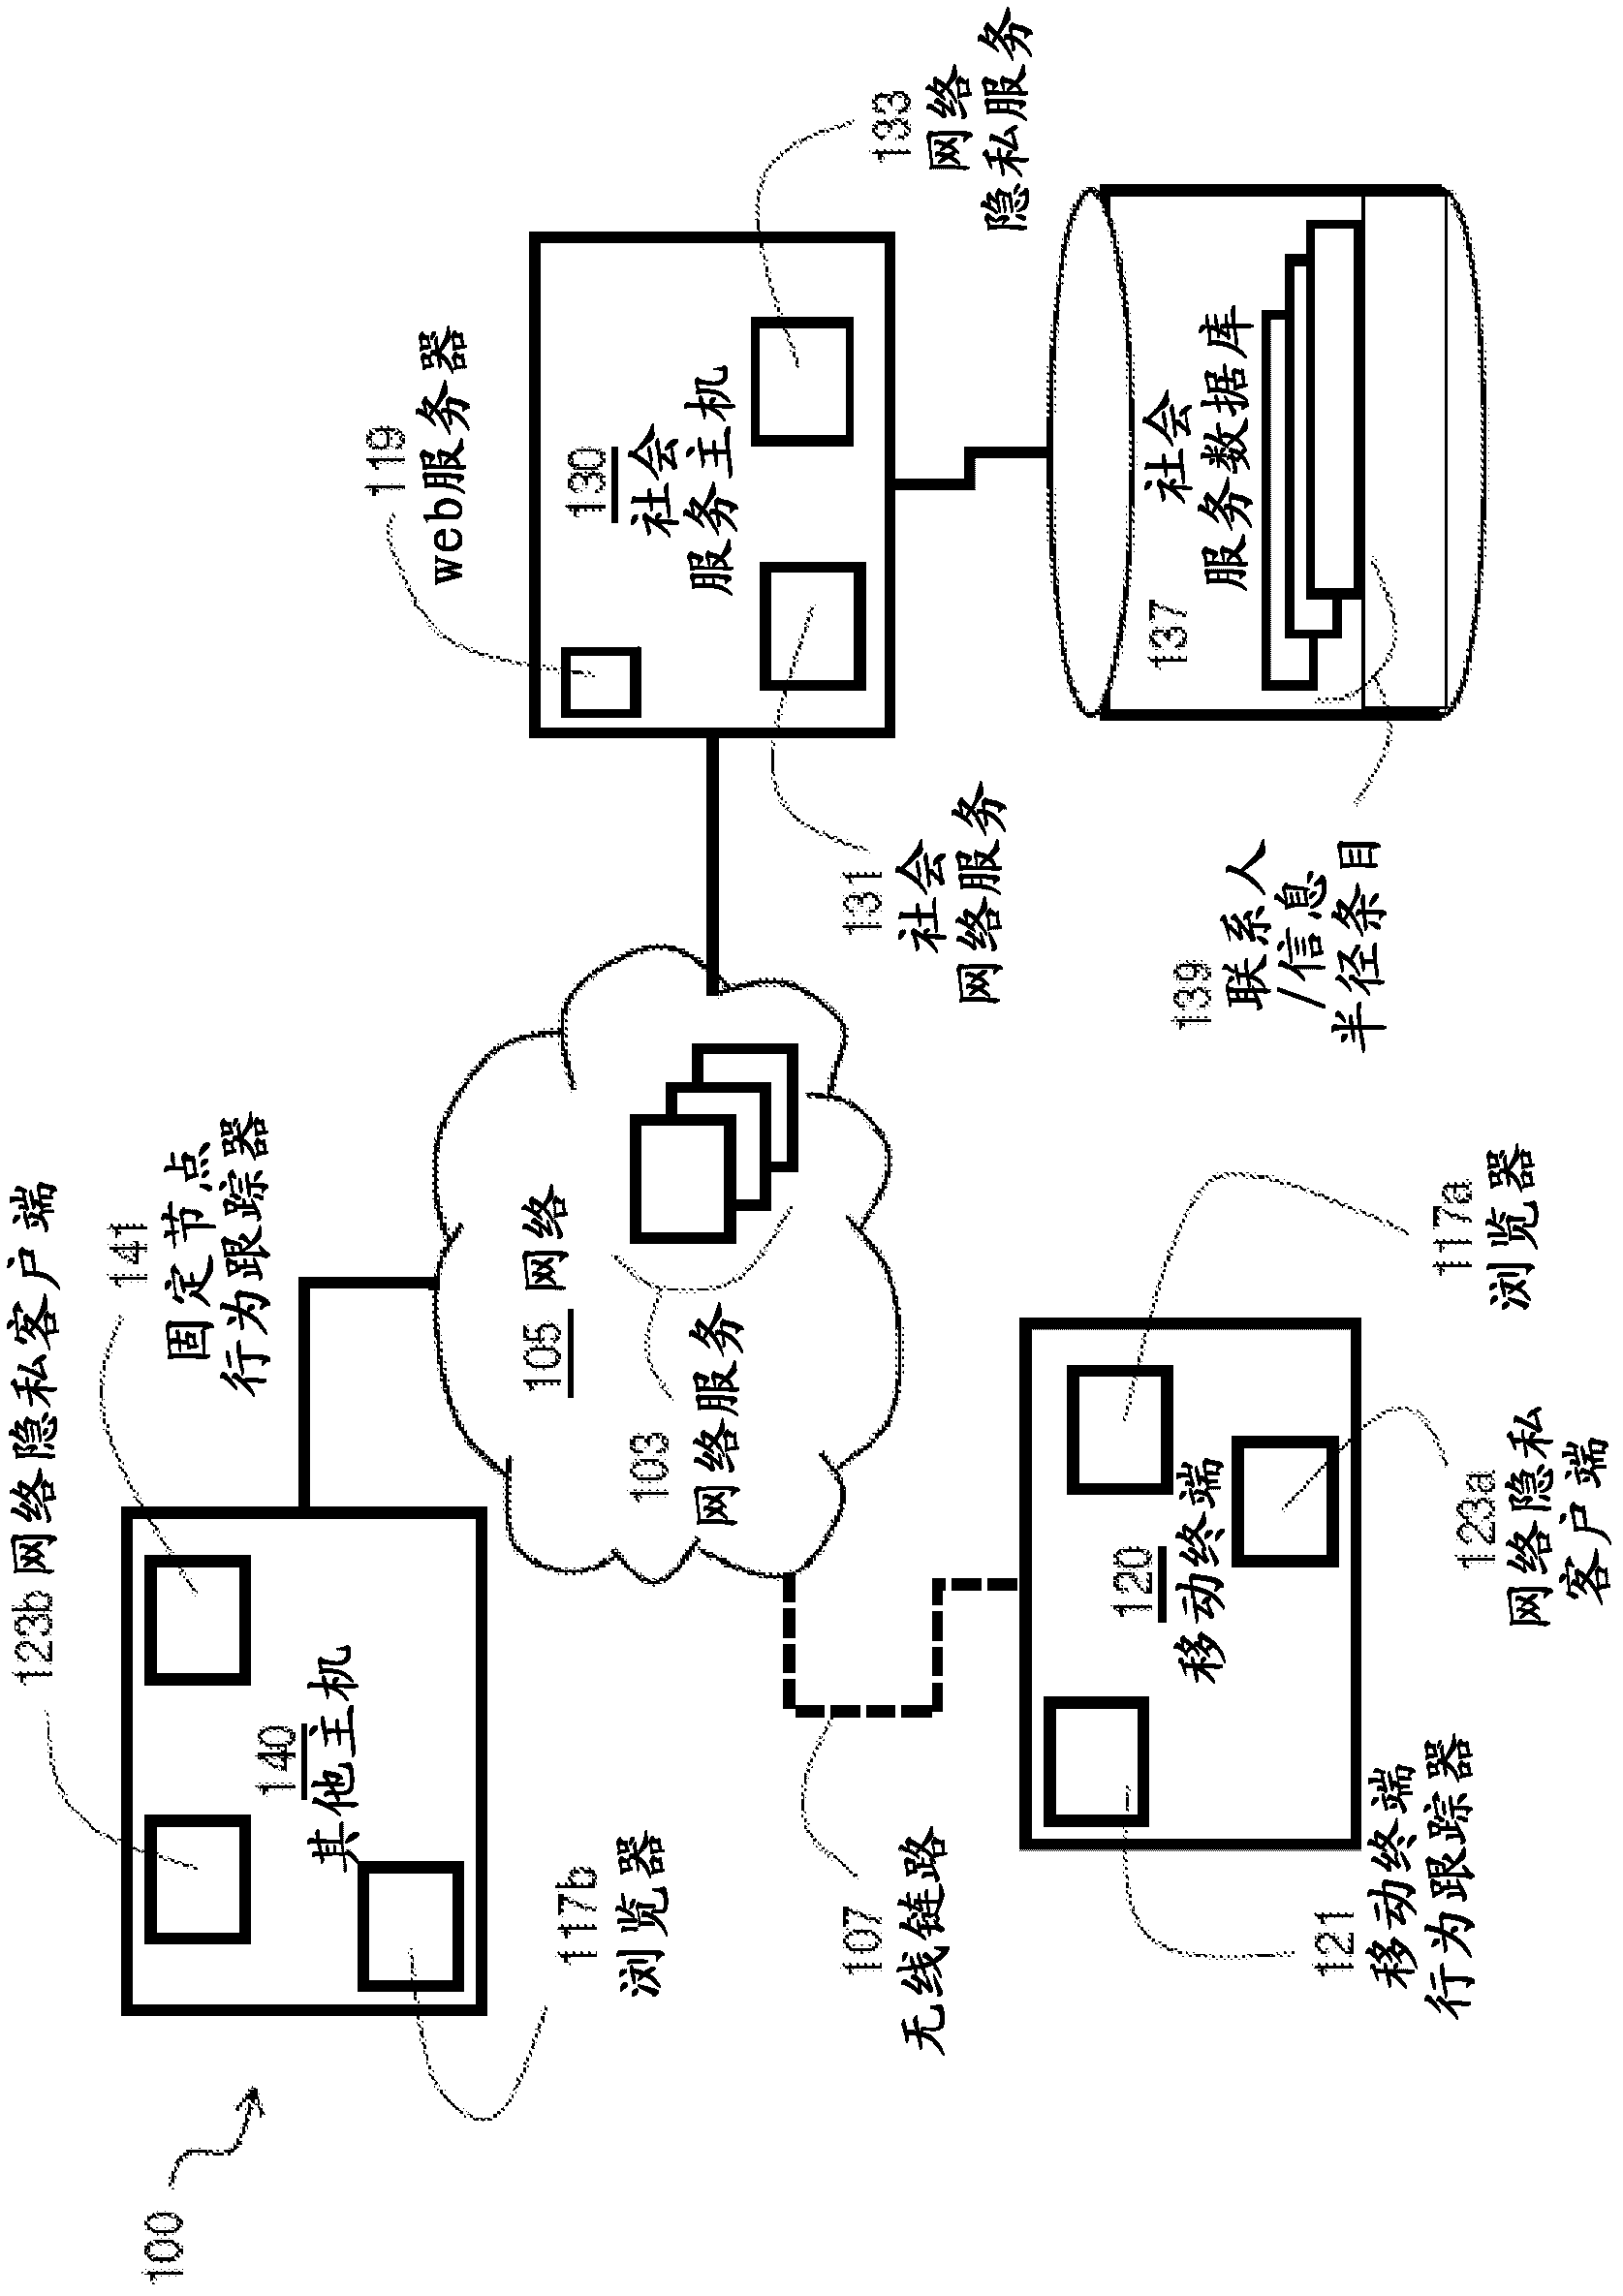 Method and apparatus for intuitive management of privacy settings